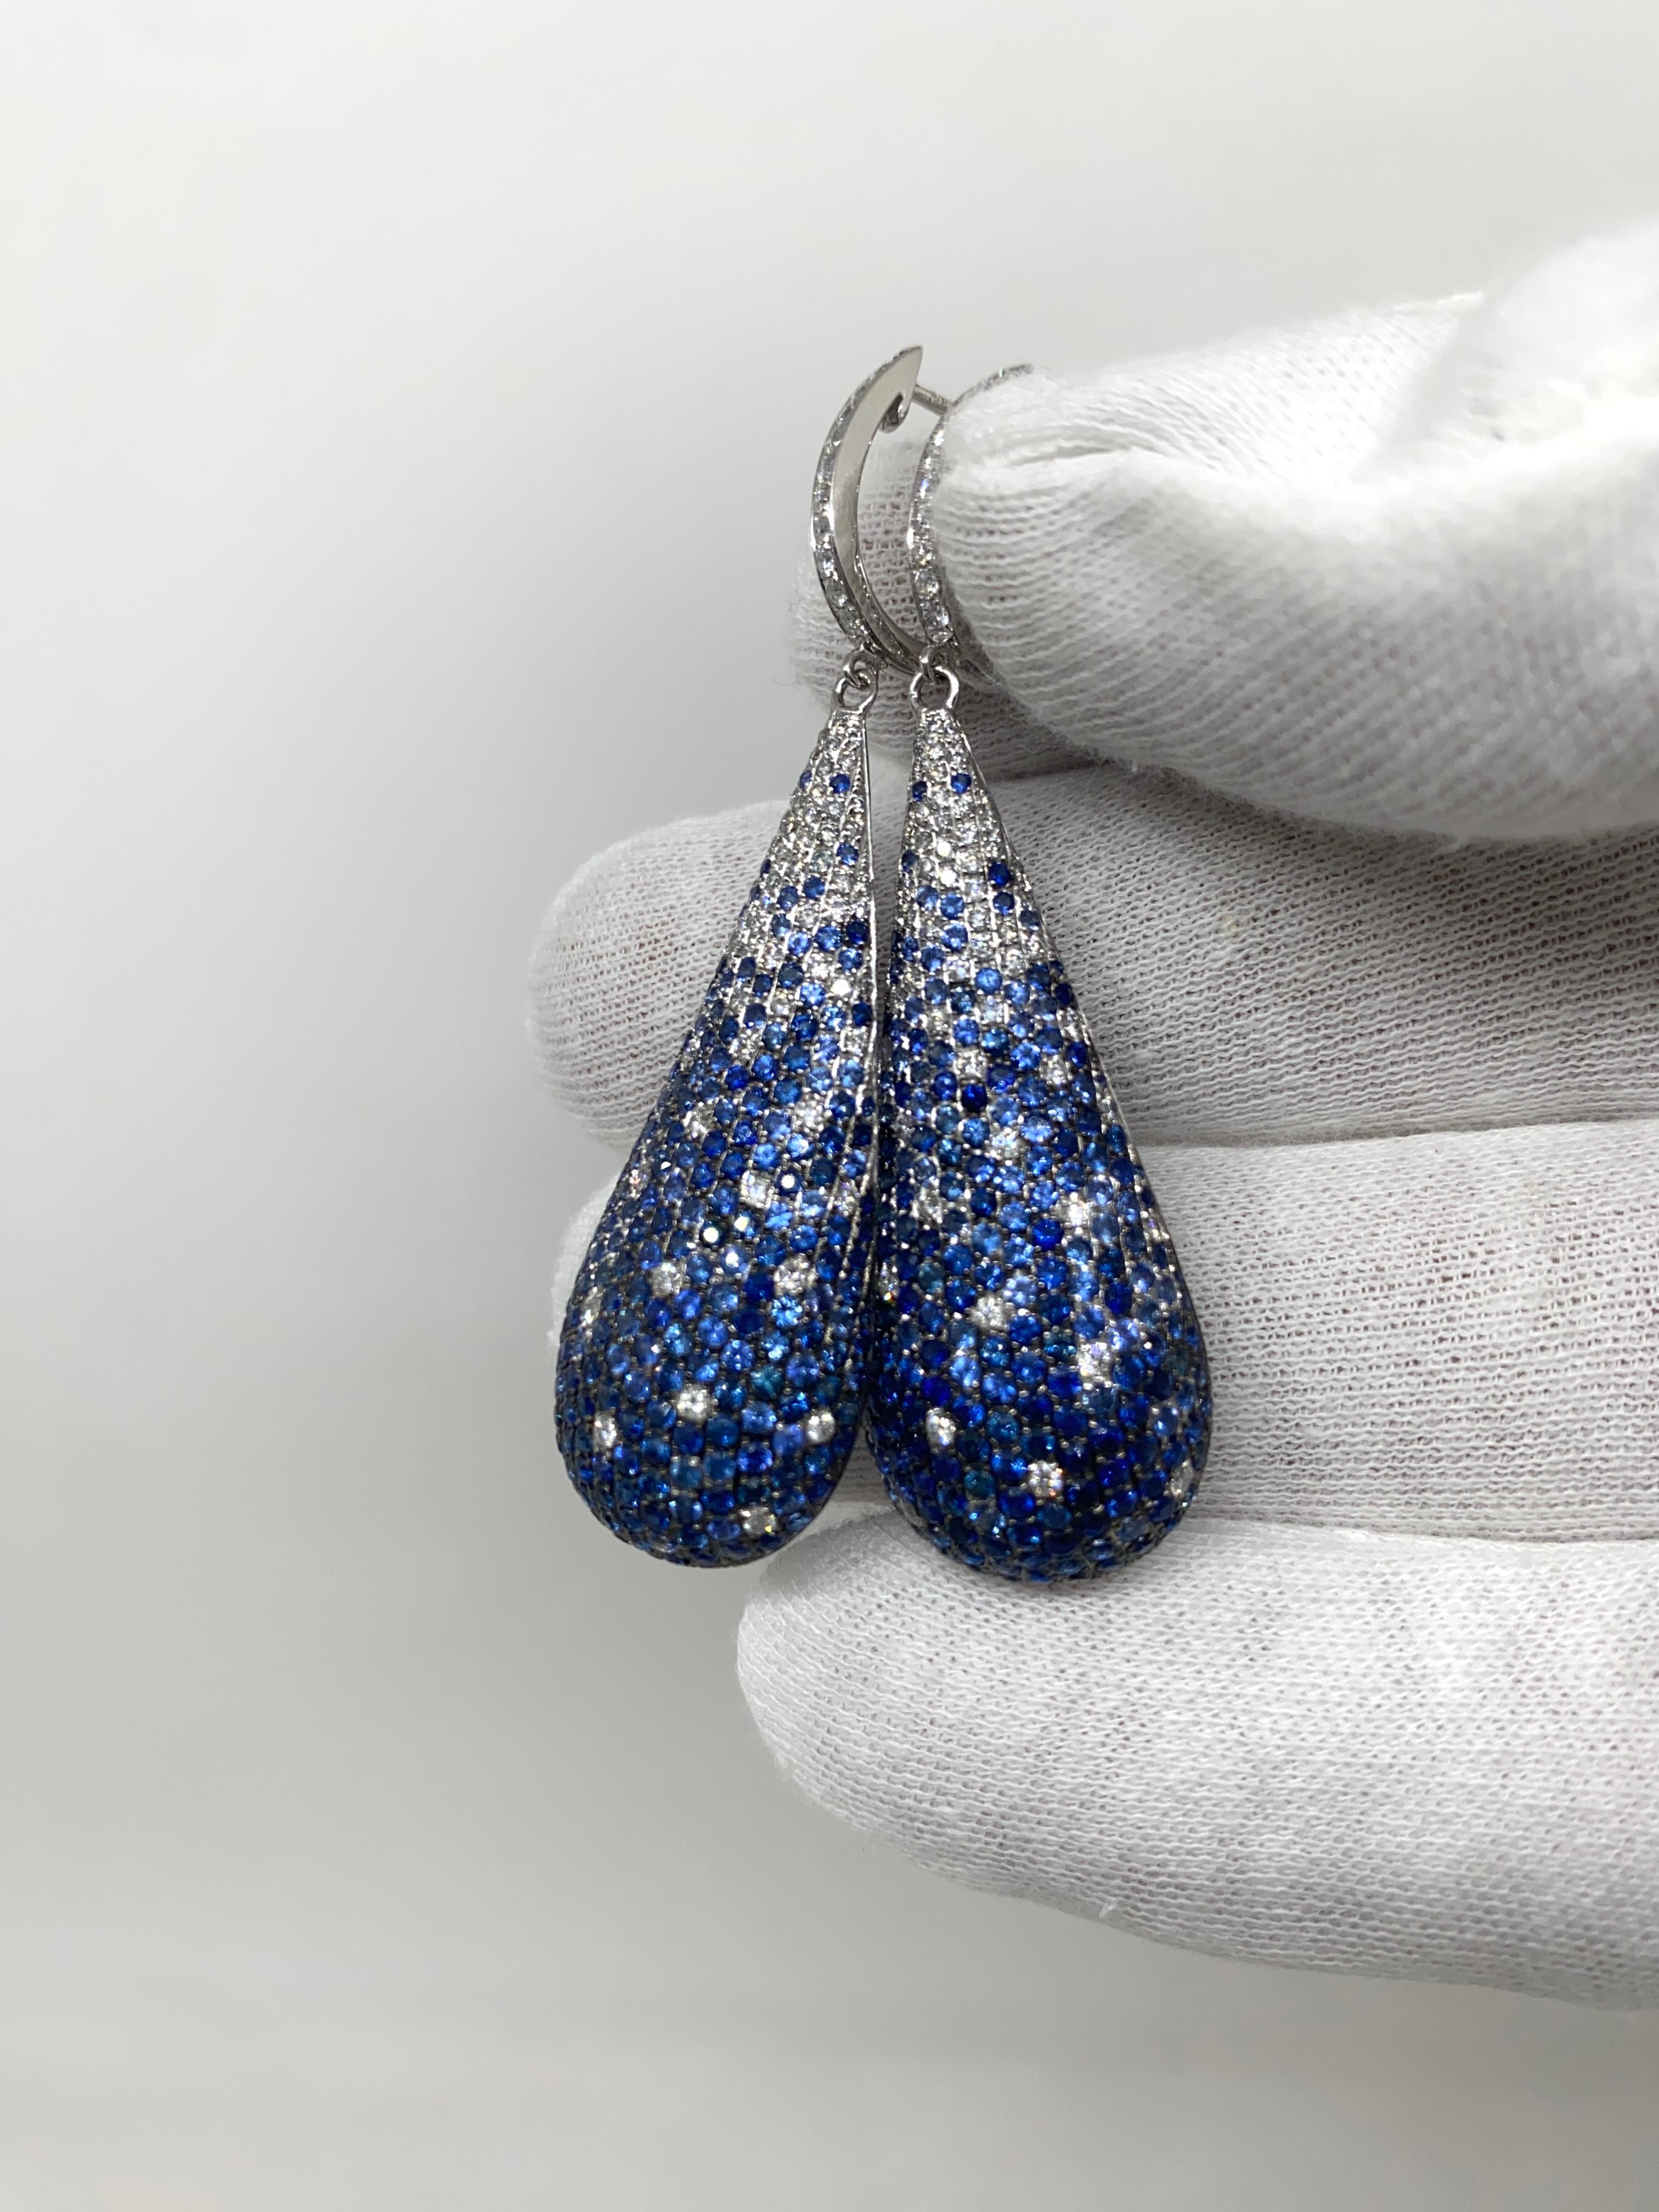 Brilliant Cut 18kt White Gold Stunning Drop Earrings 5.62 Ct Blue Sapphires & 1.42 Diamonds For Sale